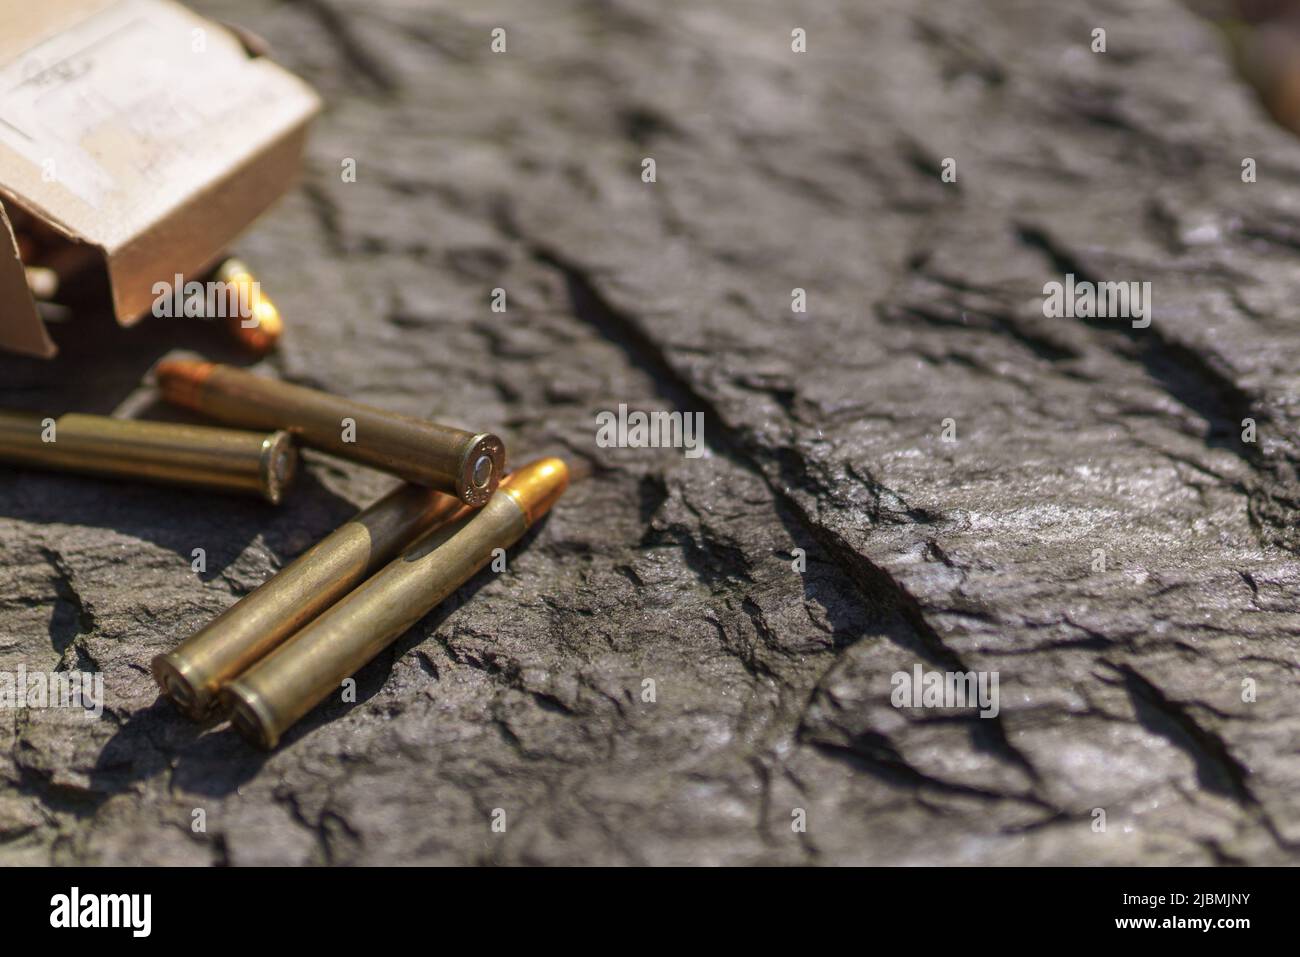 Rifle bullets and cartridges close-up on rock outdoors. Stock Photo